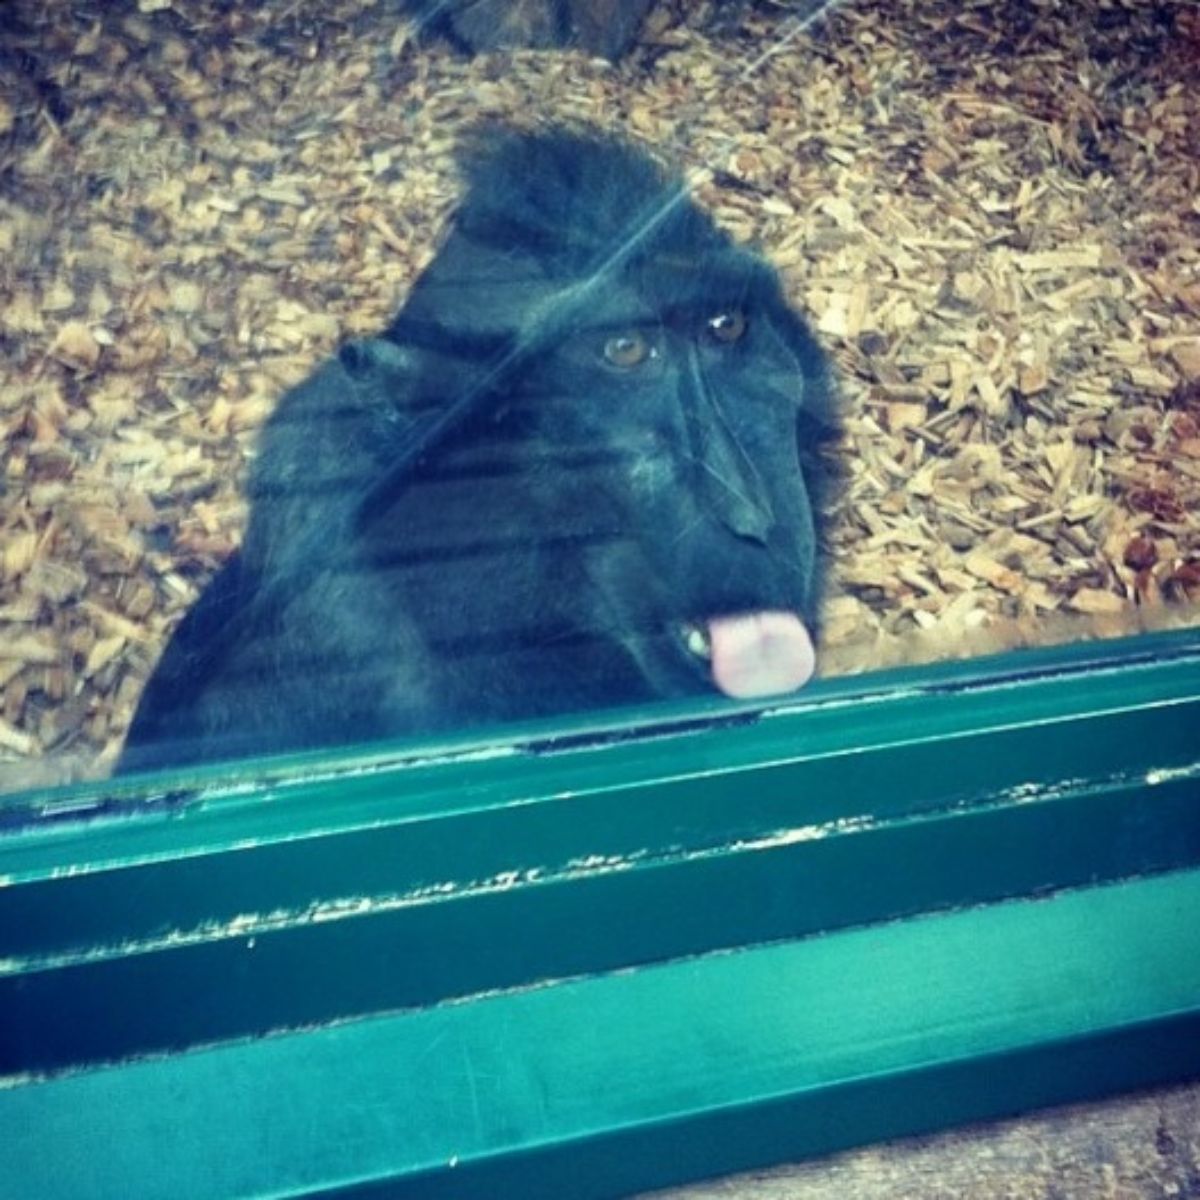 black monkey licking a glass of an enclosure